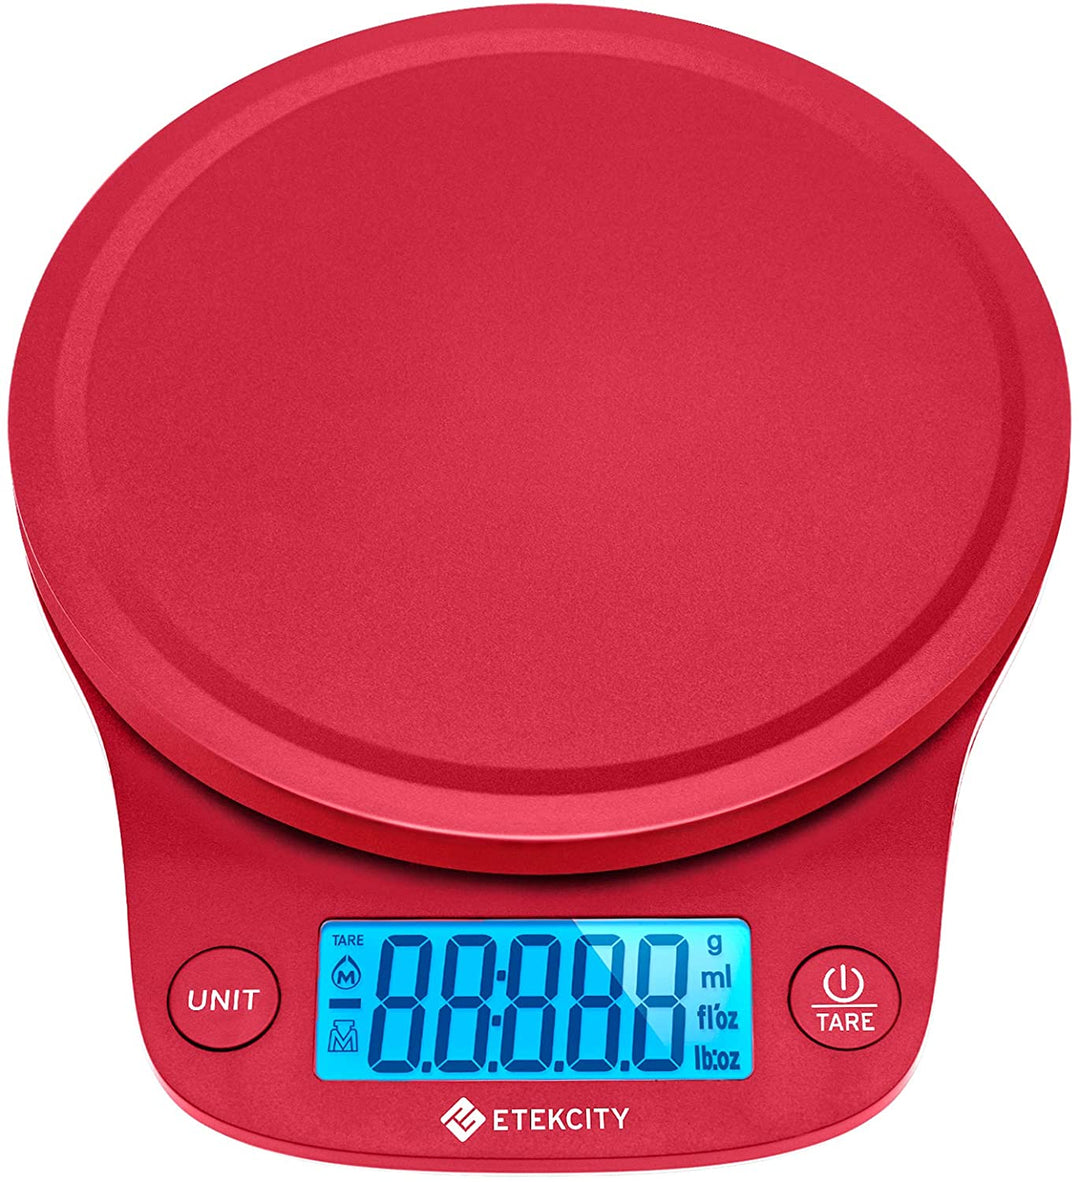 Etekcity Ek5150 Kitchen Food Scale with Removable Bowl (Red)